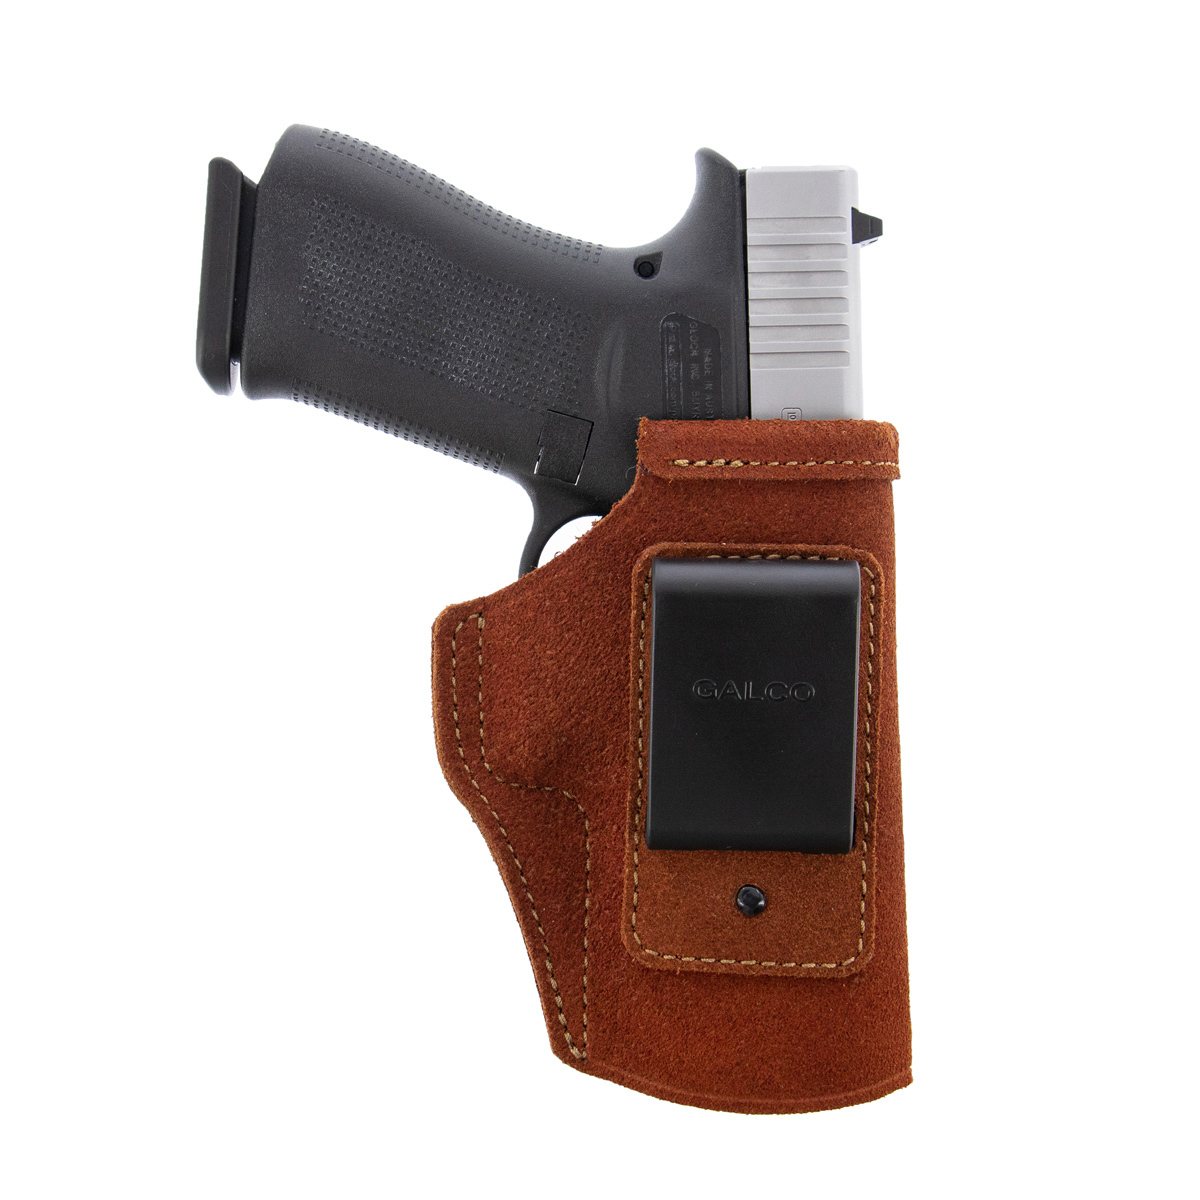 Galco Stow-n-go Inside Pant Holster STO436B RH Black Ruger LCP Kel Tec P32 for sale online 